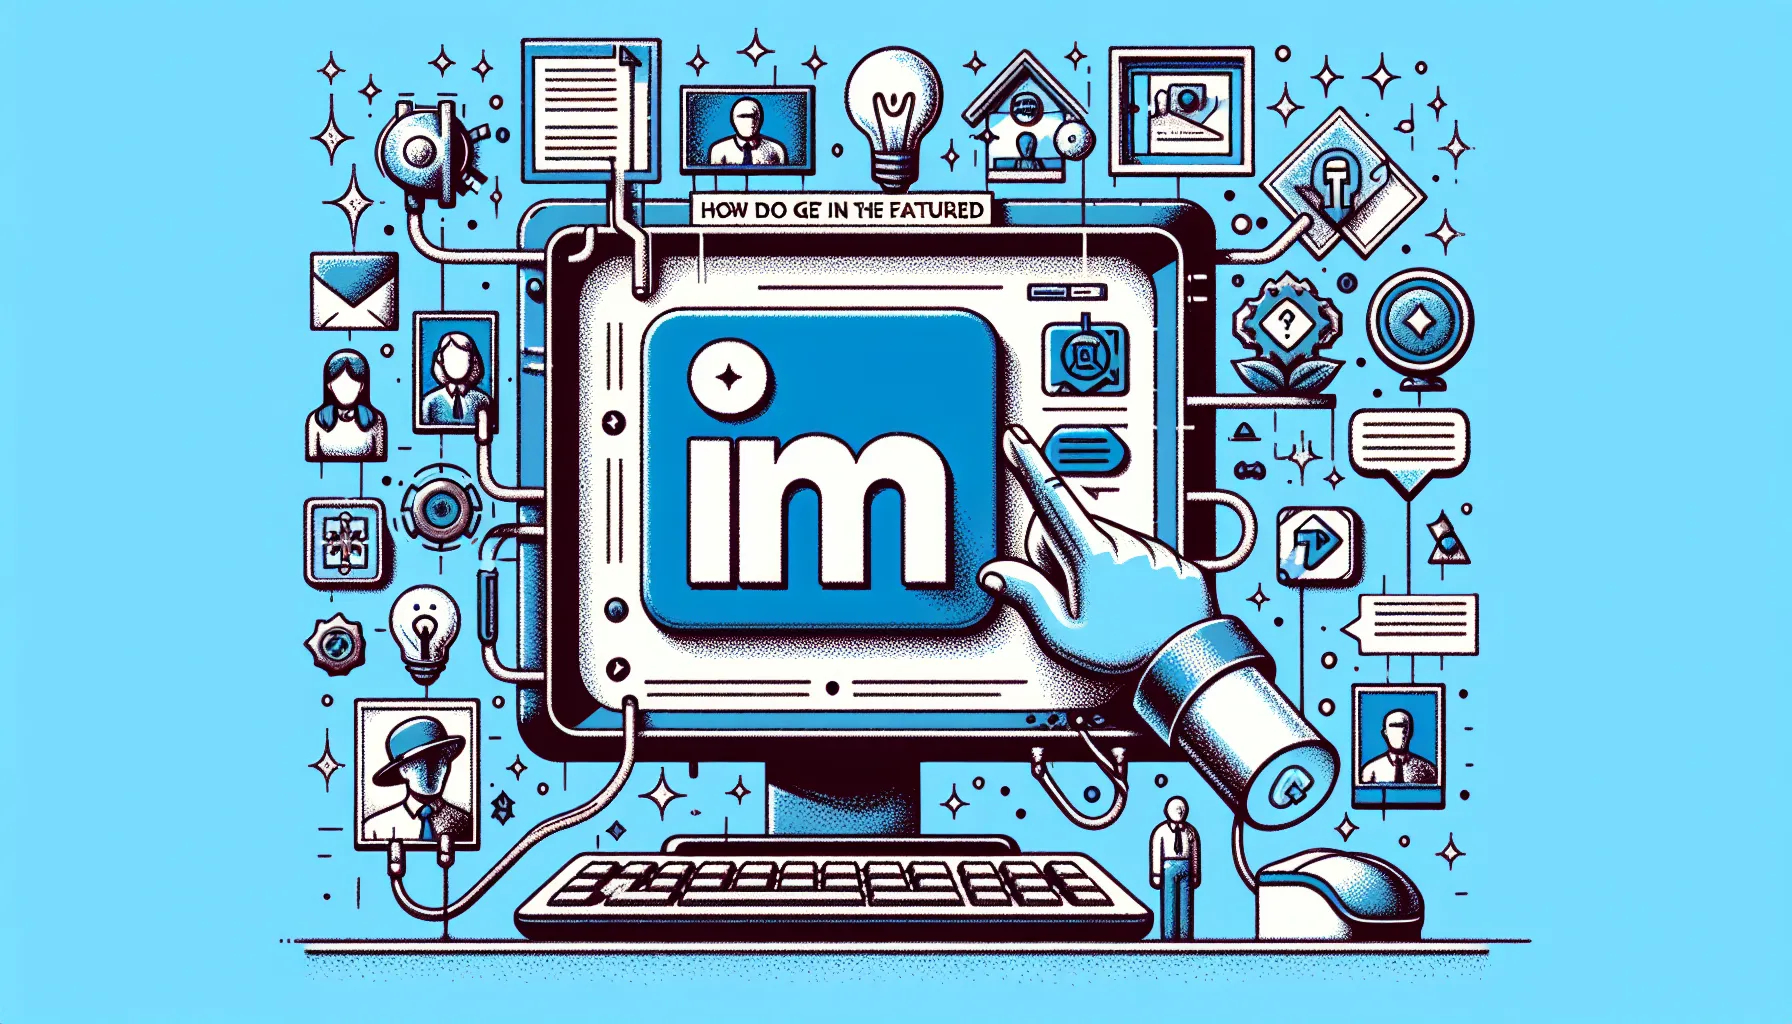 How Do You Get Featured On LinkedIn?